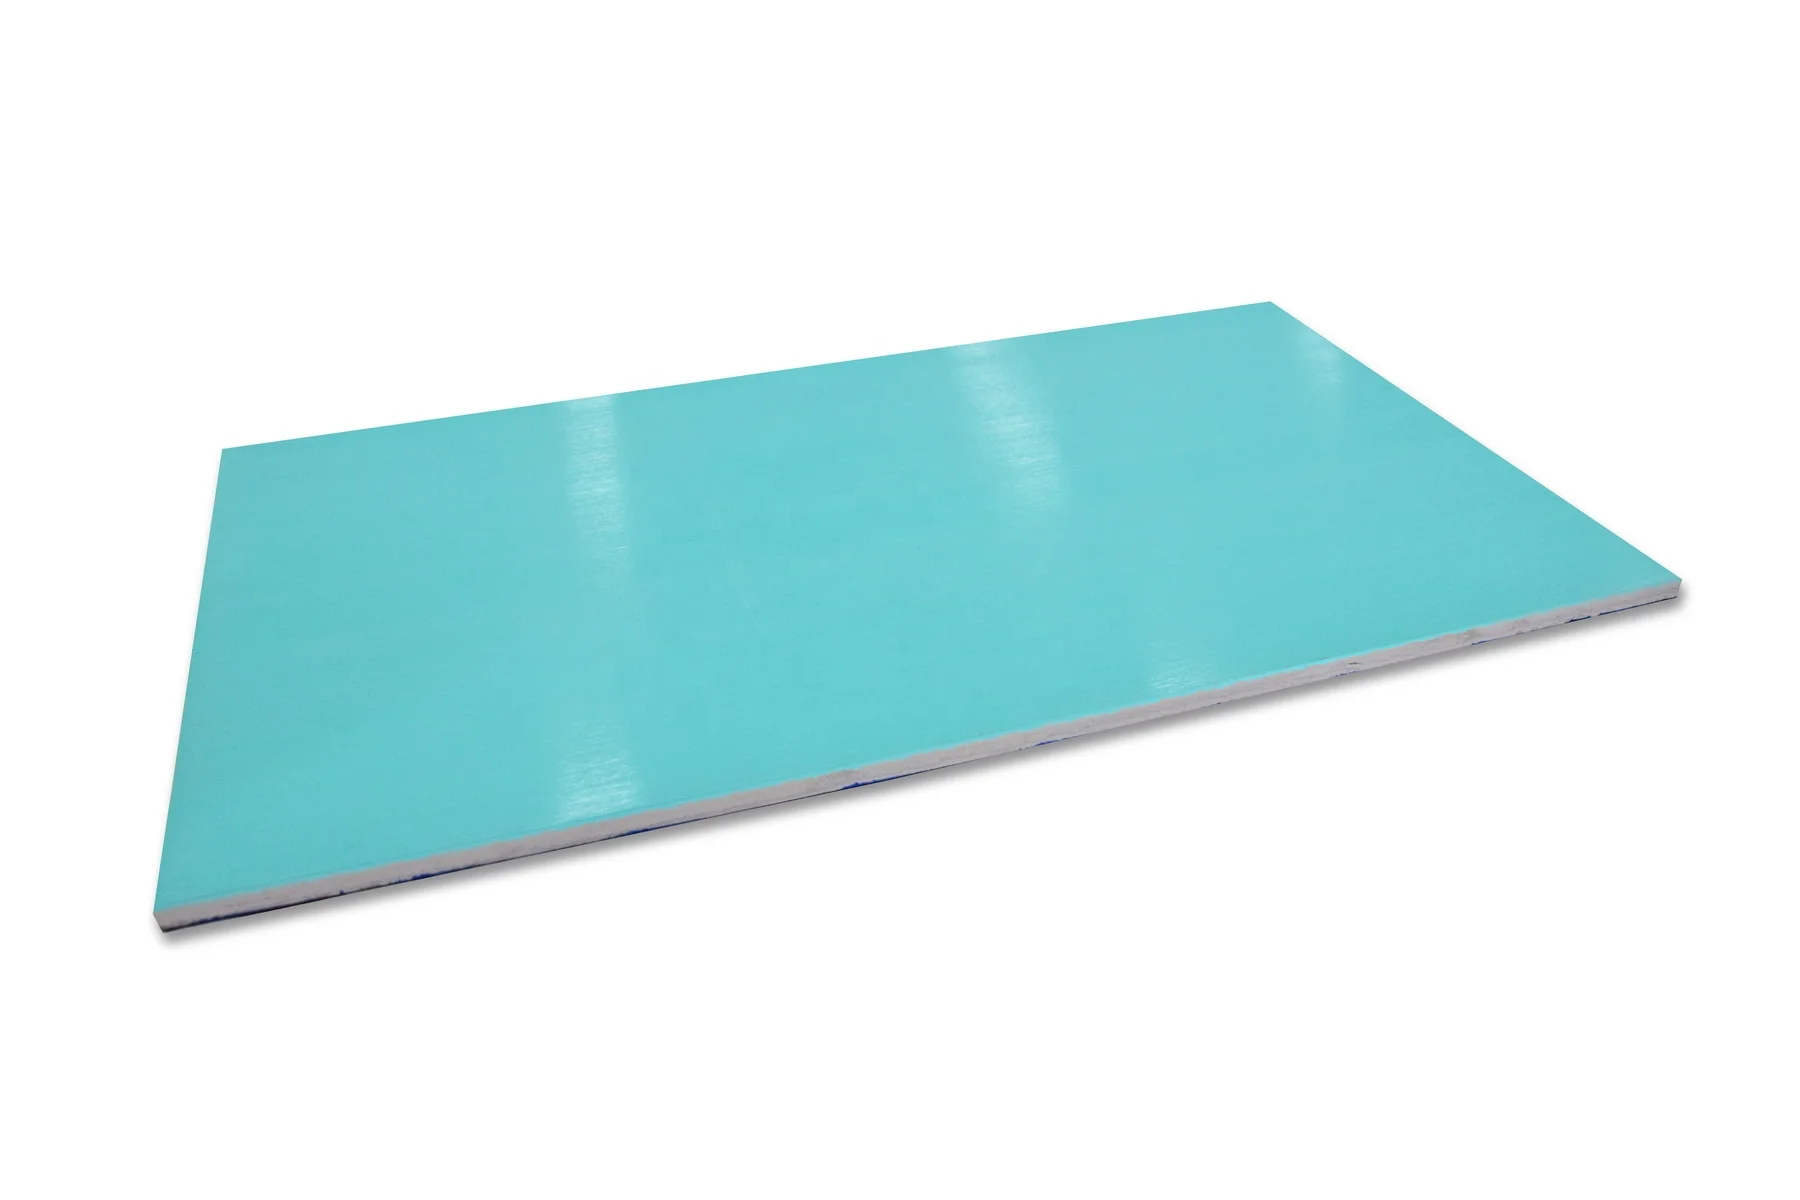 Hydro-solve Blue top photosensitive etching magnesium plate or sheet for quicker heats up